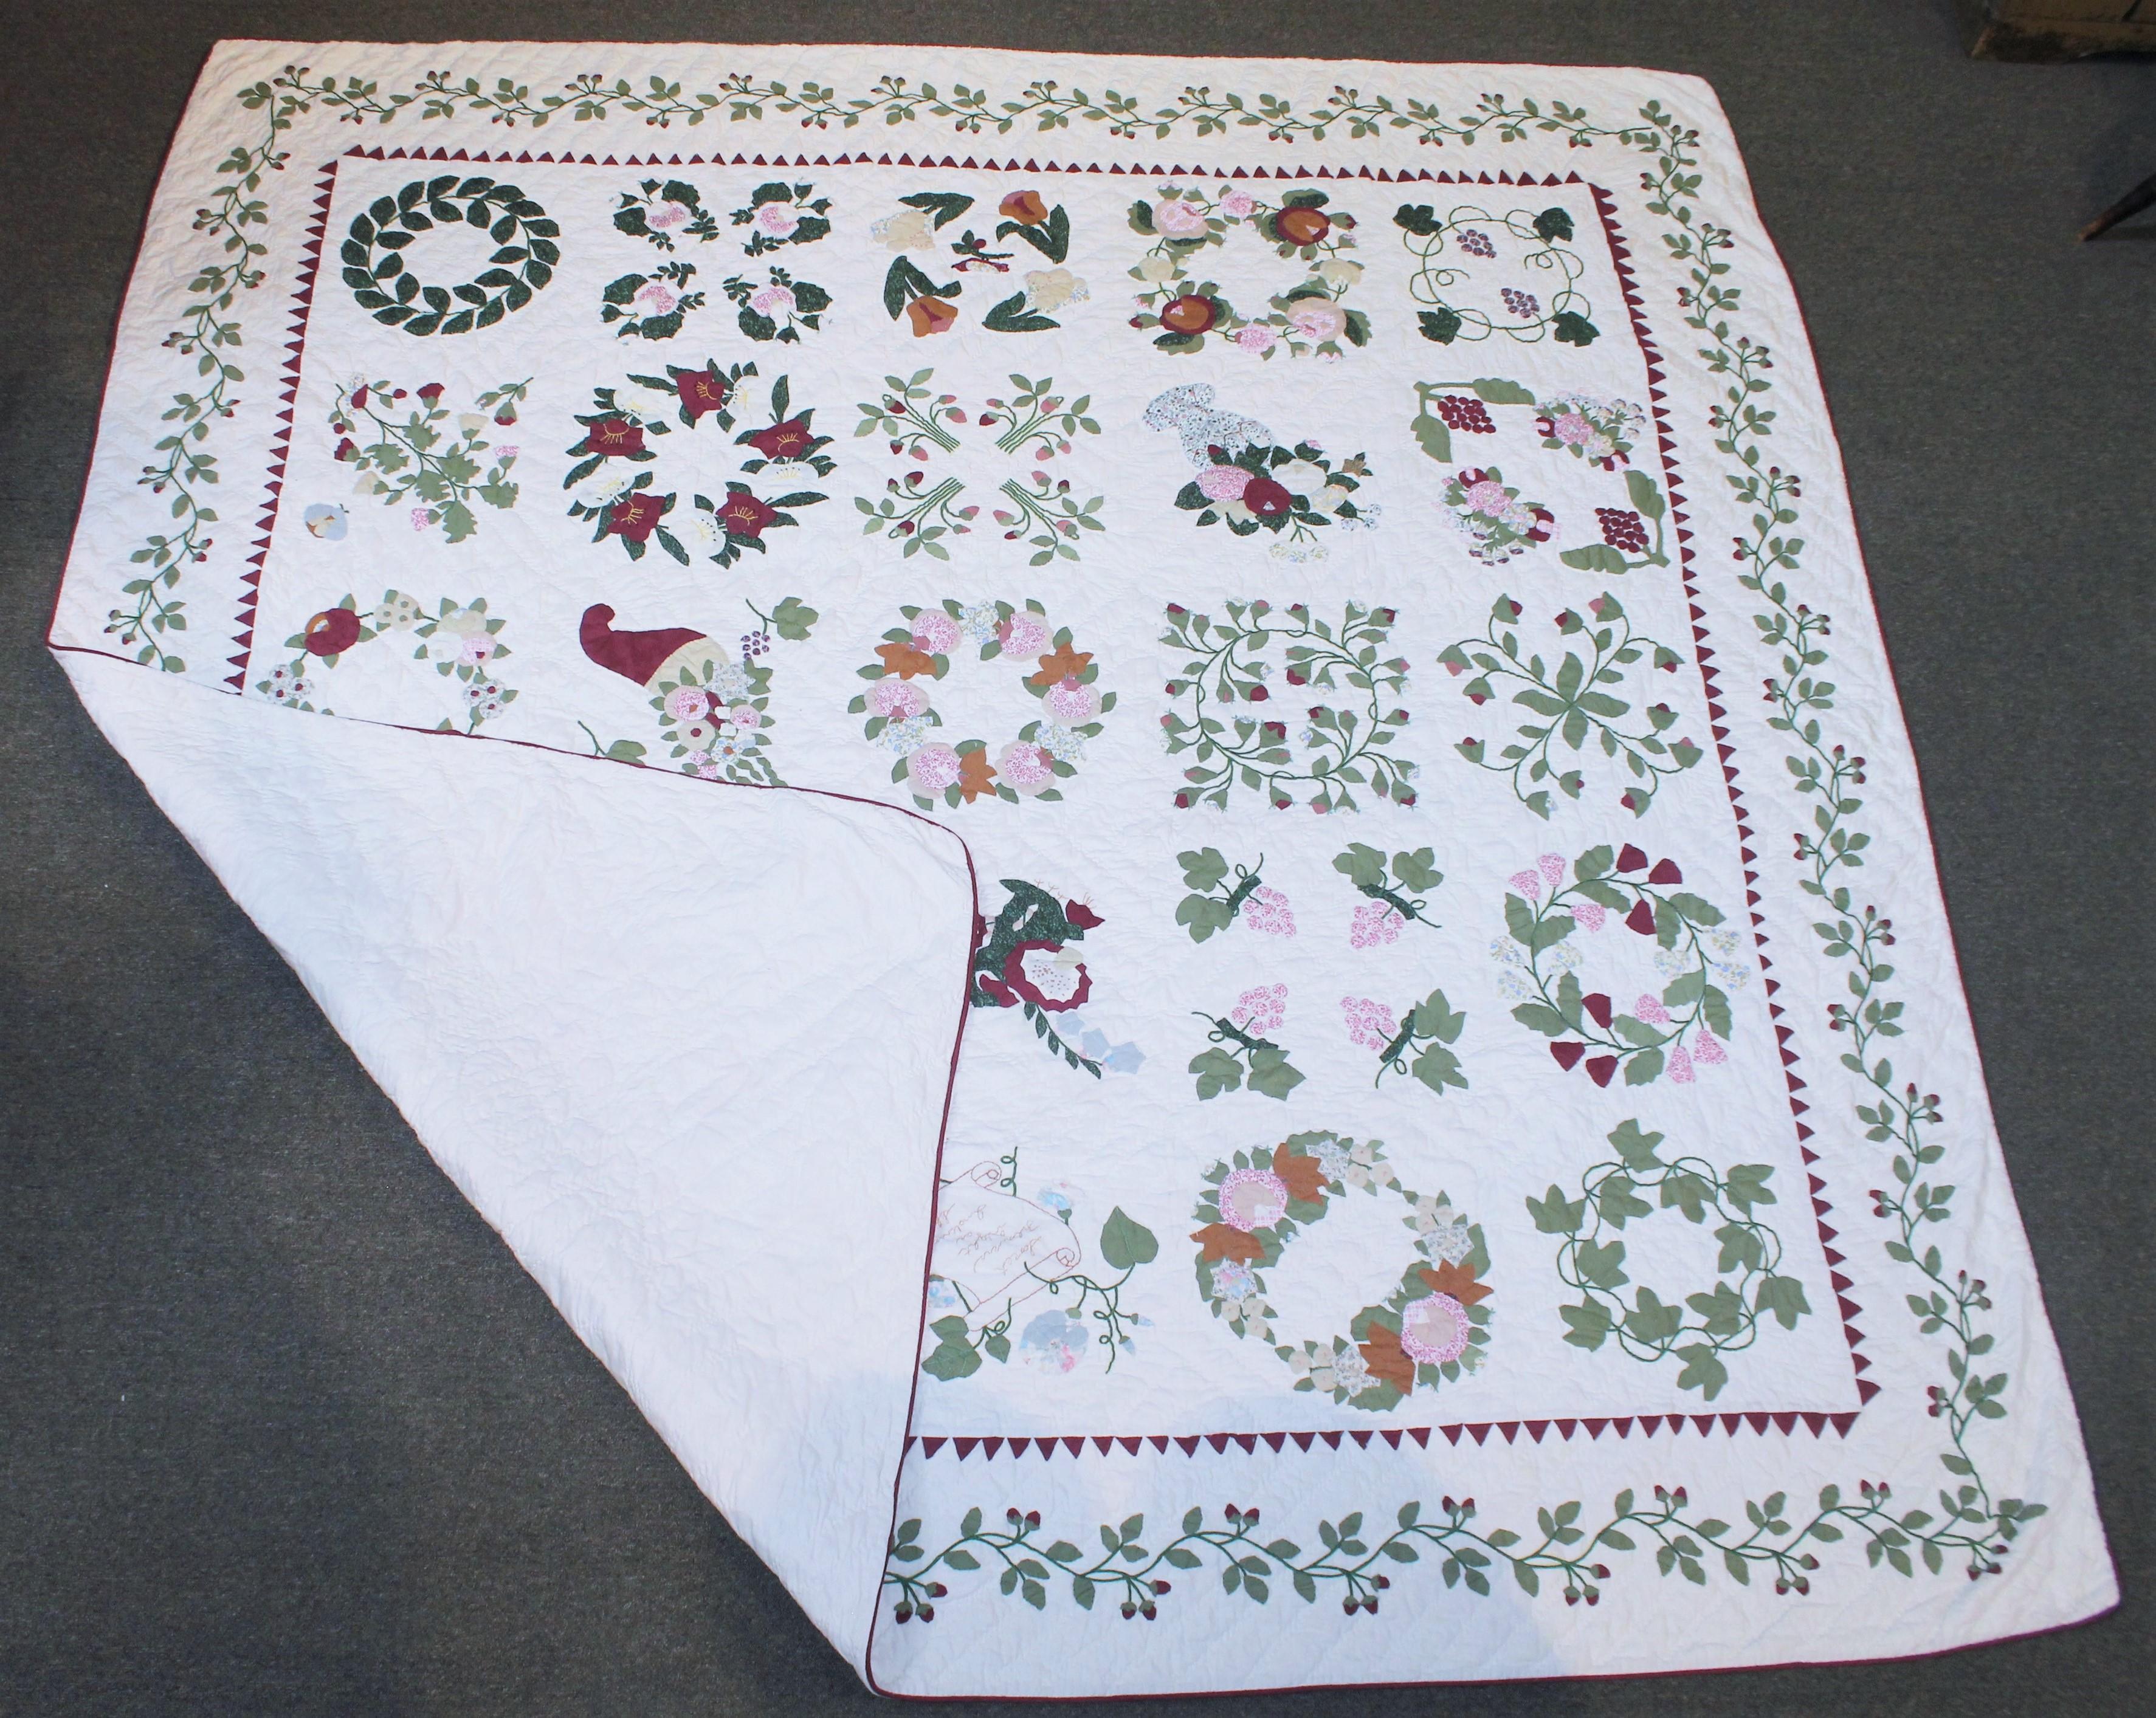 This amazing Baltimore album quilt is a copy put out from the Folk Art Museum. Its a copy of a 1860 Baltimore Album quilt for little money. This original sold in Auction in NYC for over 160,000.00 in the eighty's !!! The condition is very good and